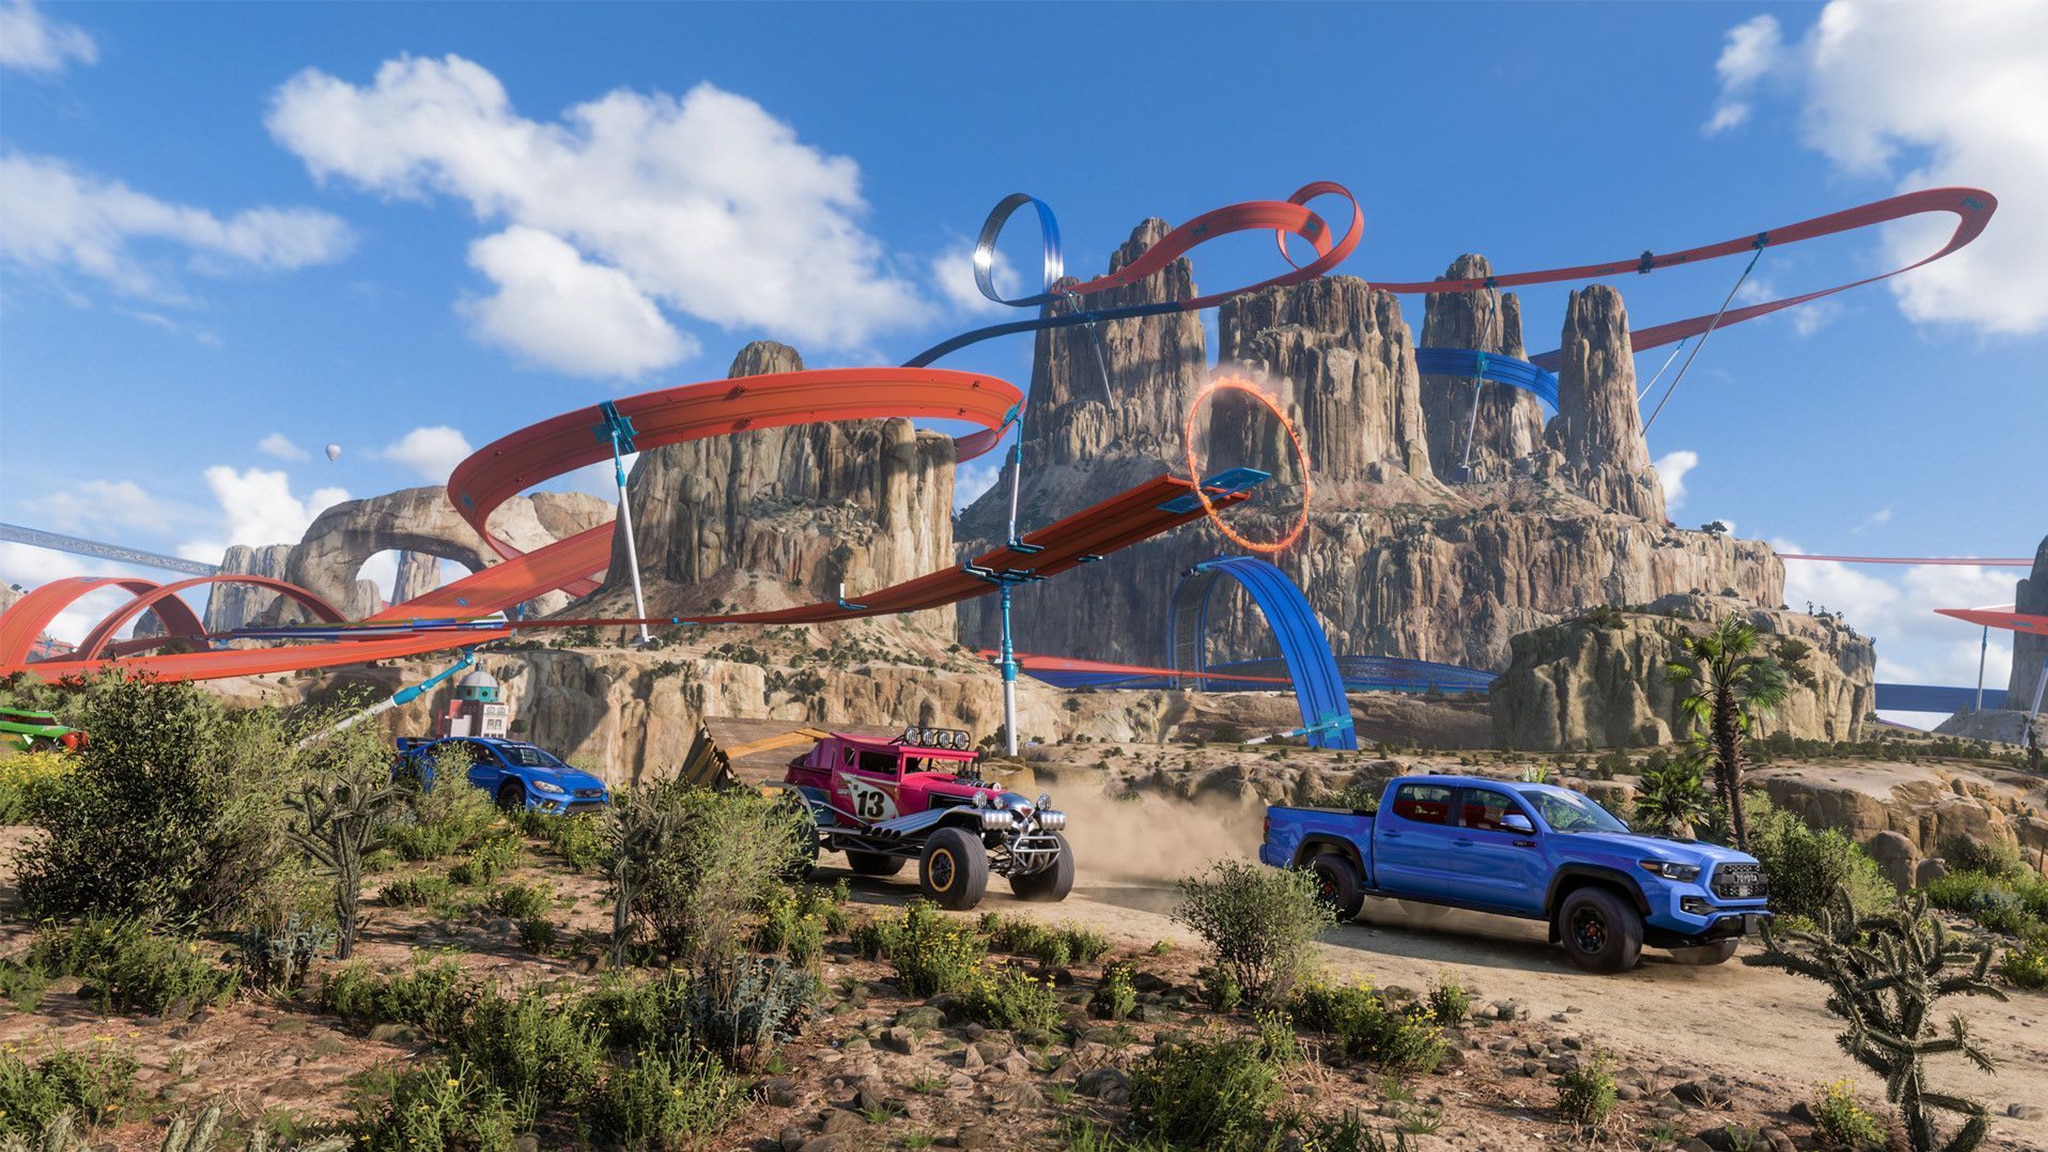 Forza Horizon 5 Expansion 2 Should Take Notes From 'Fortune Island